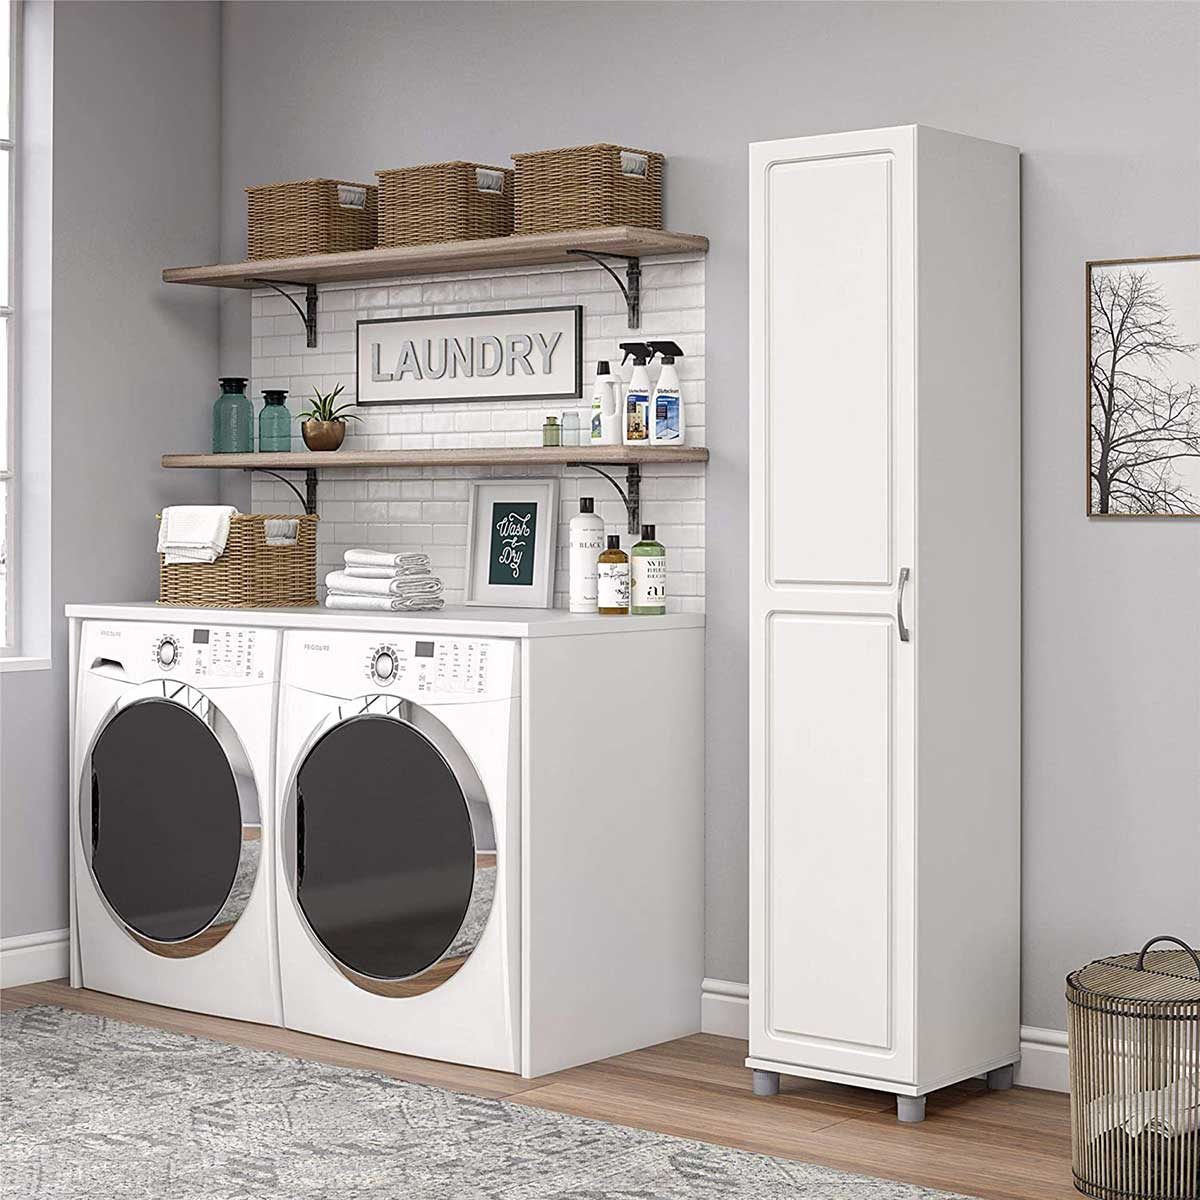 8 Best Laundry Room Storage Cabinets | The Family Handyman